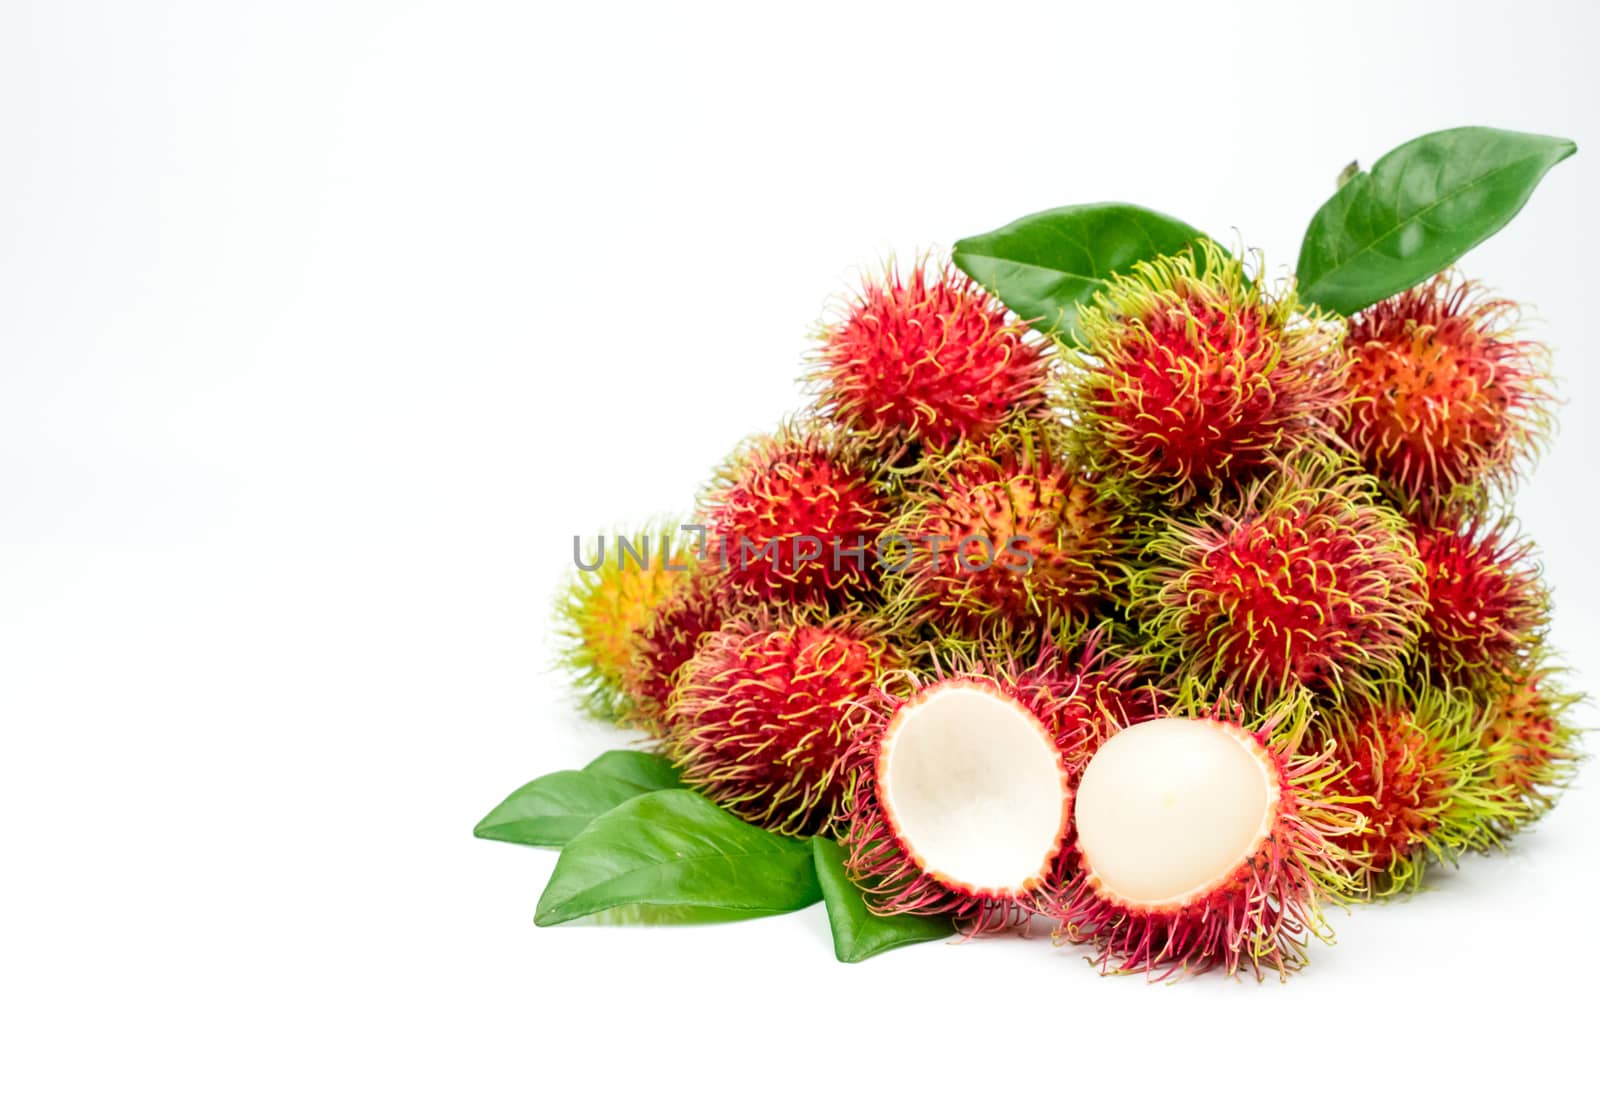 Closeup of fresh red ripe rambutan (Nephelium lappaceum) with leaves isolated on white background. Thai dessert sweet fruits. Tropical fruit. by Fahroni